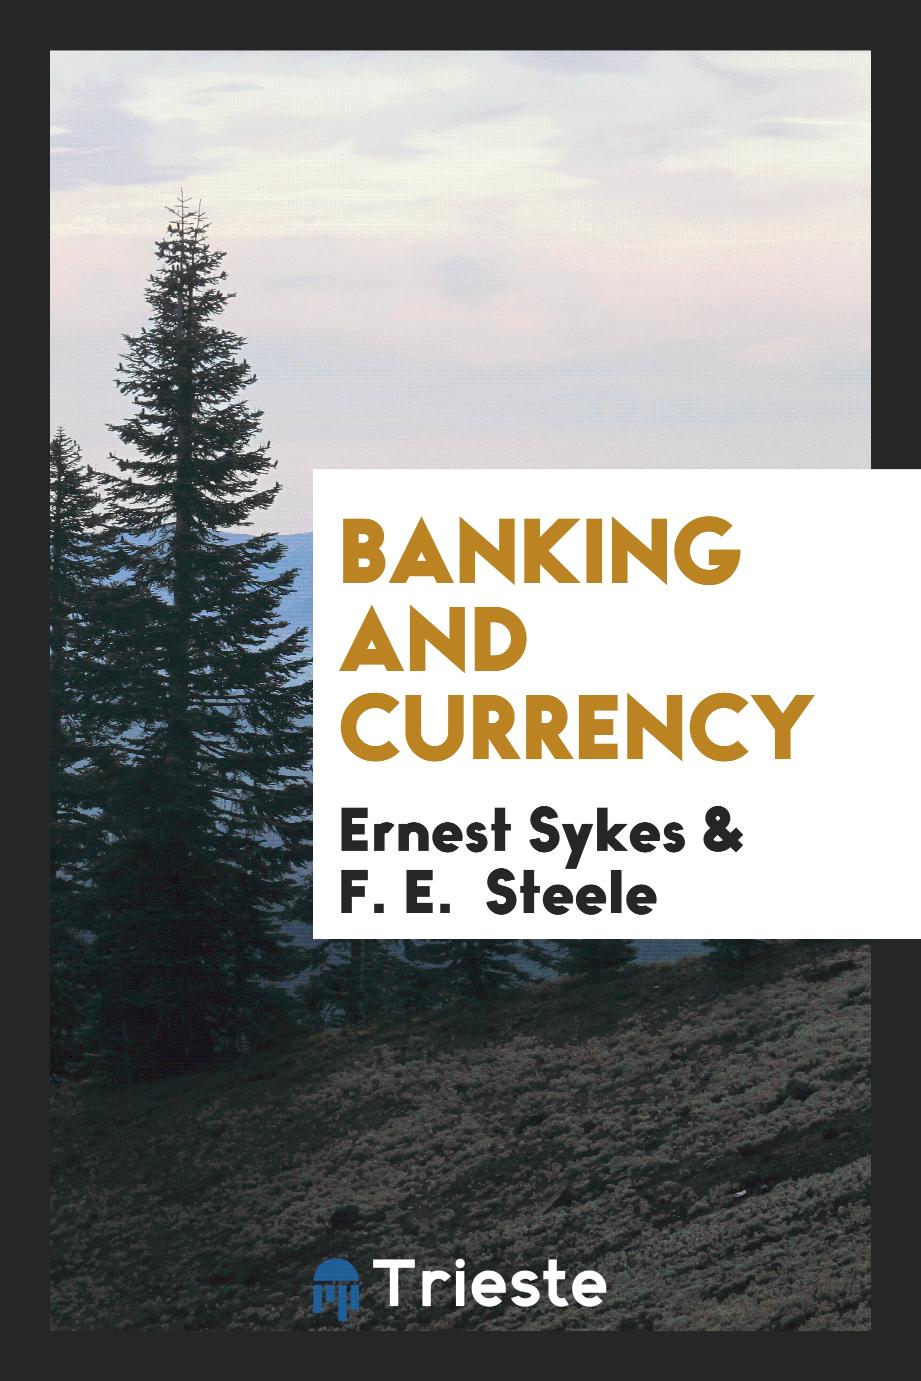 Banking and currency